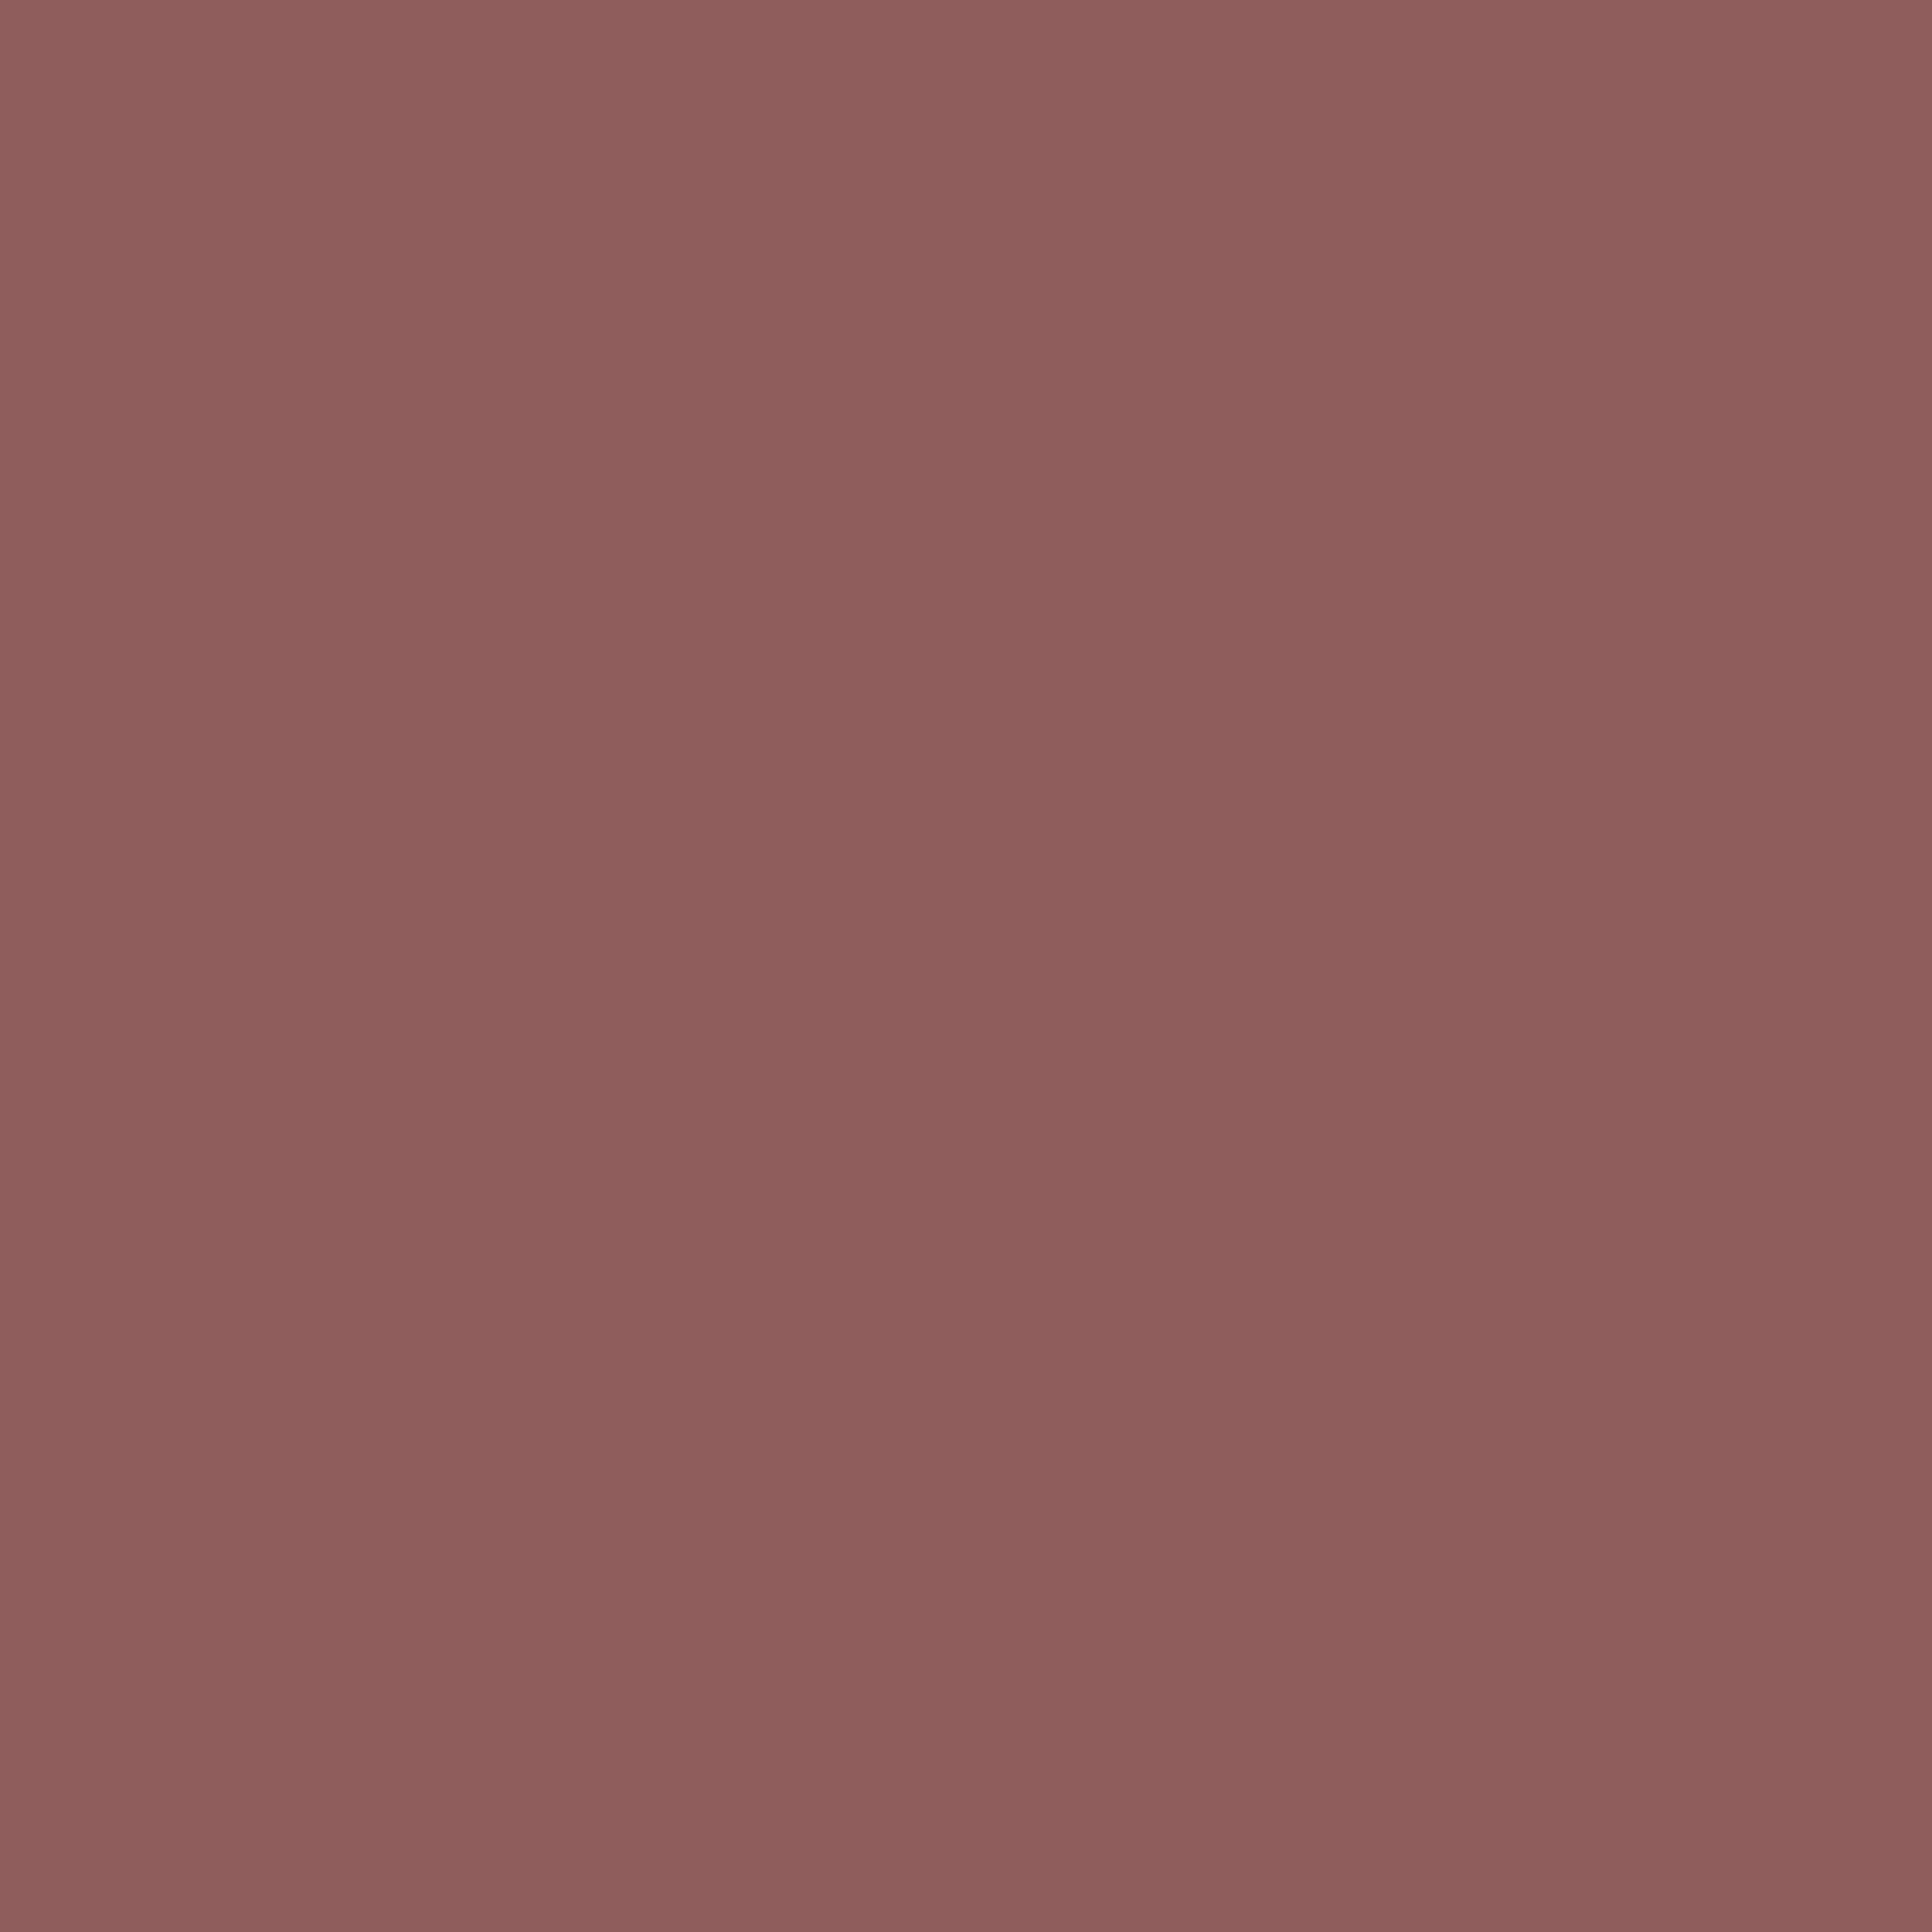 2732x2732 Rose Taupe Solid Color Background